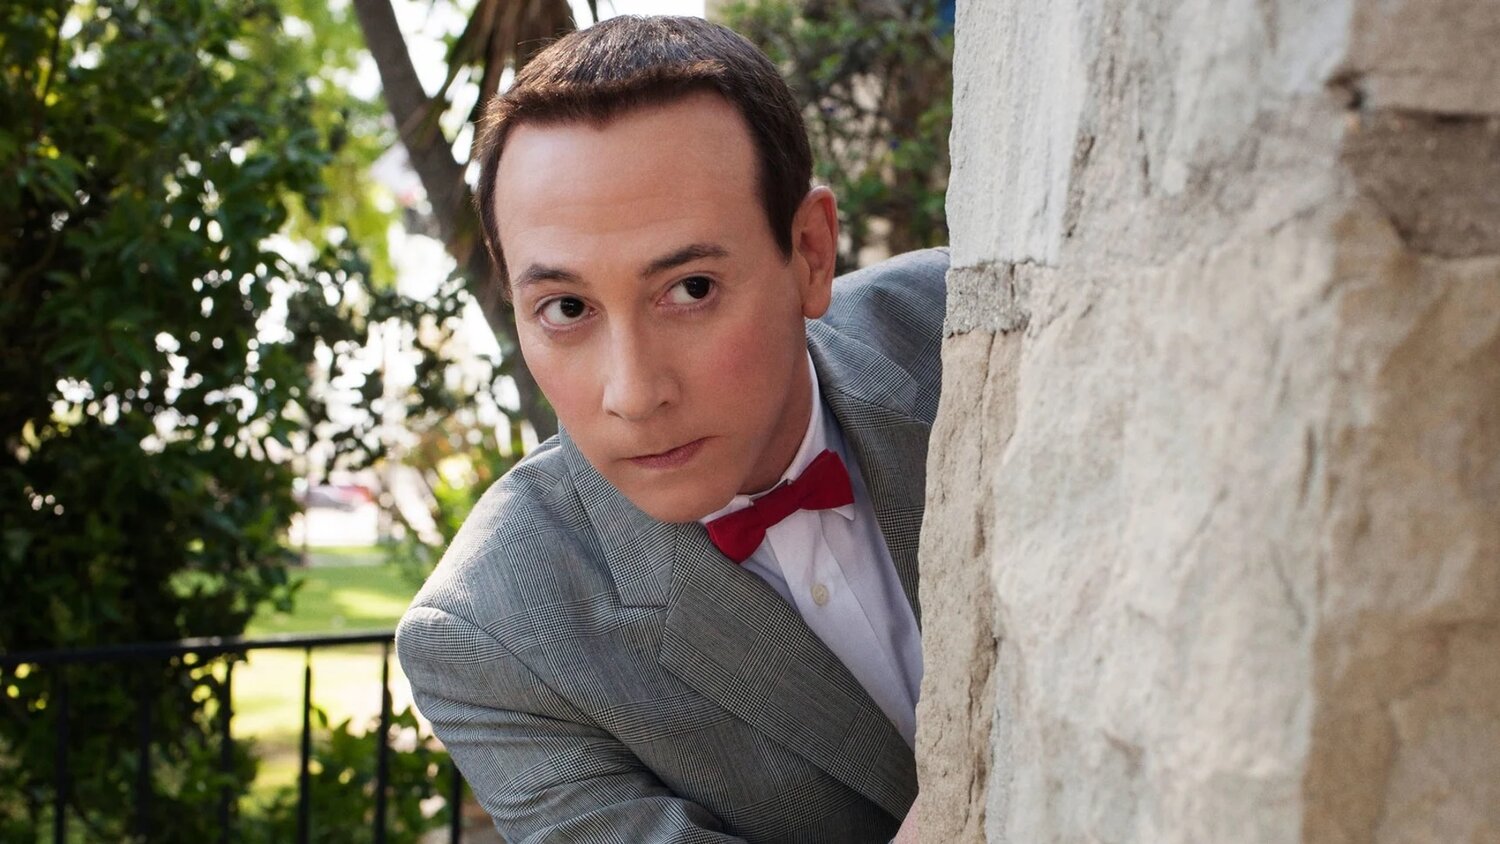 The Directors of UNCUT GEMS Are Considering Directing a New PEE-WEE ...